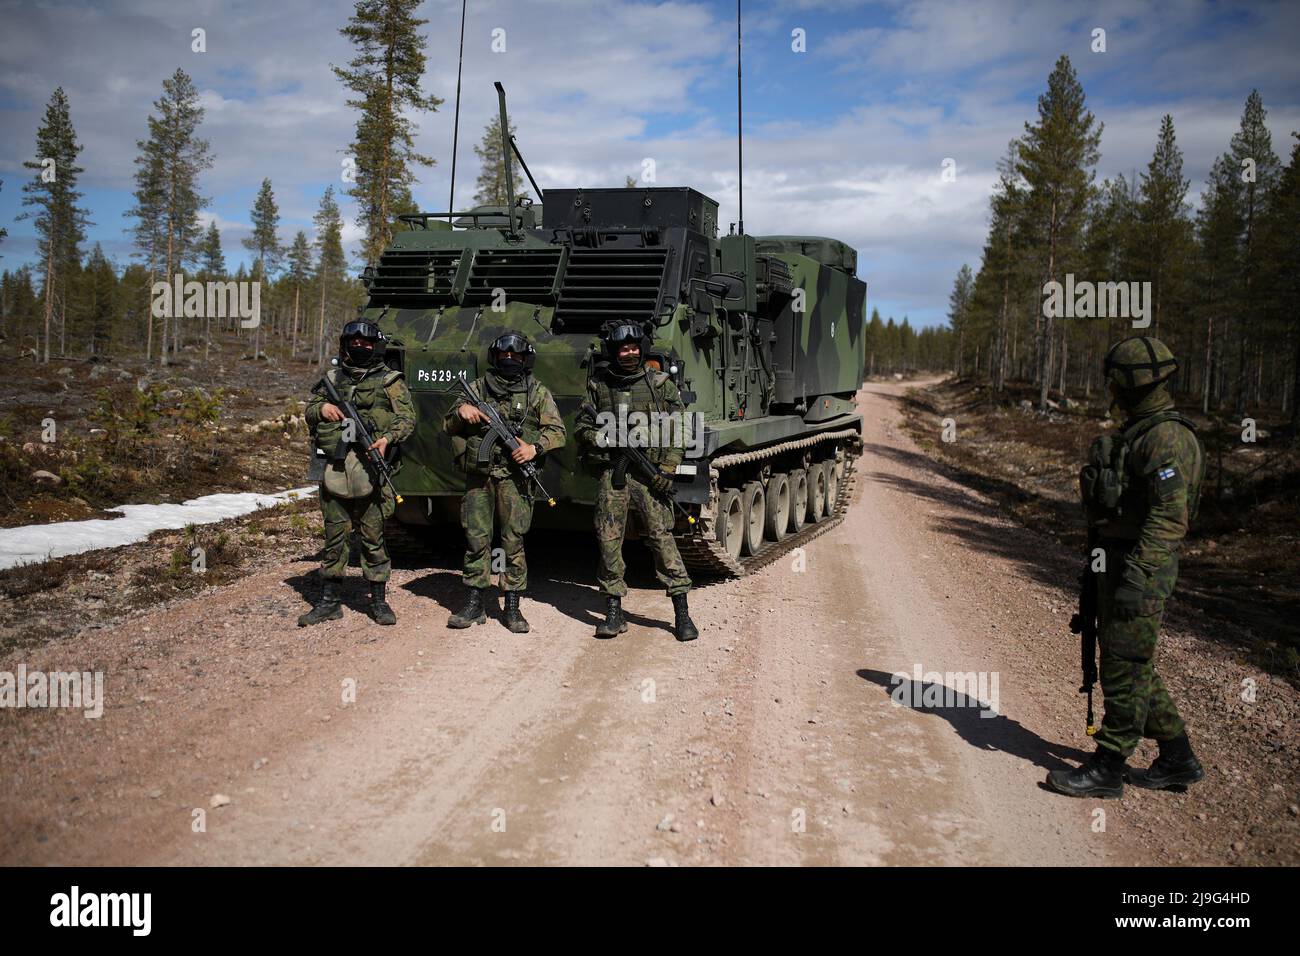 Finnish army soldiers walk near a rocket launcher during Lightning Strike  22 exercise, in Rovajarvi, Finland, May 23, 2022. REUTERS/Stoyan Nenov  Stock Photo - Alamy